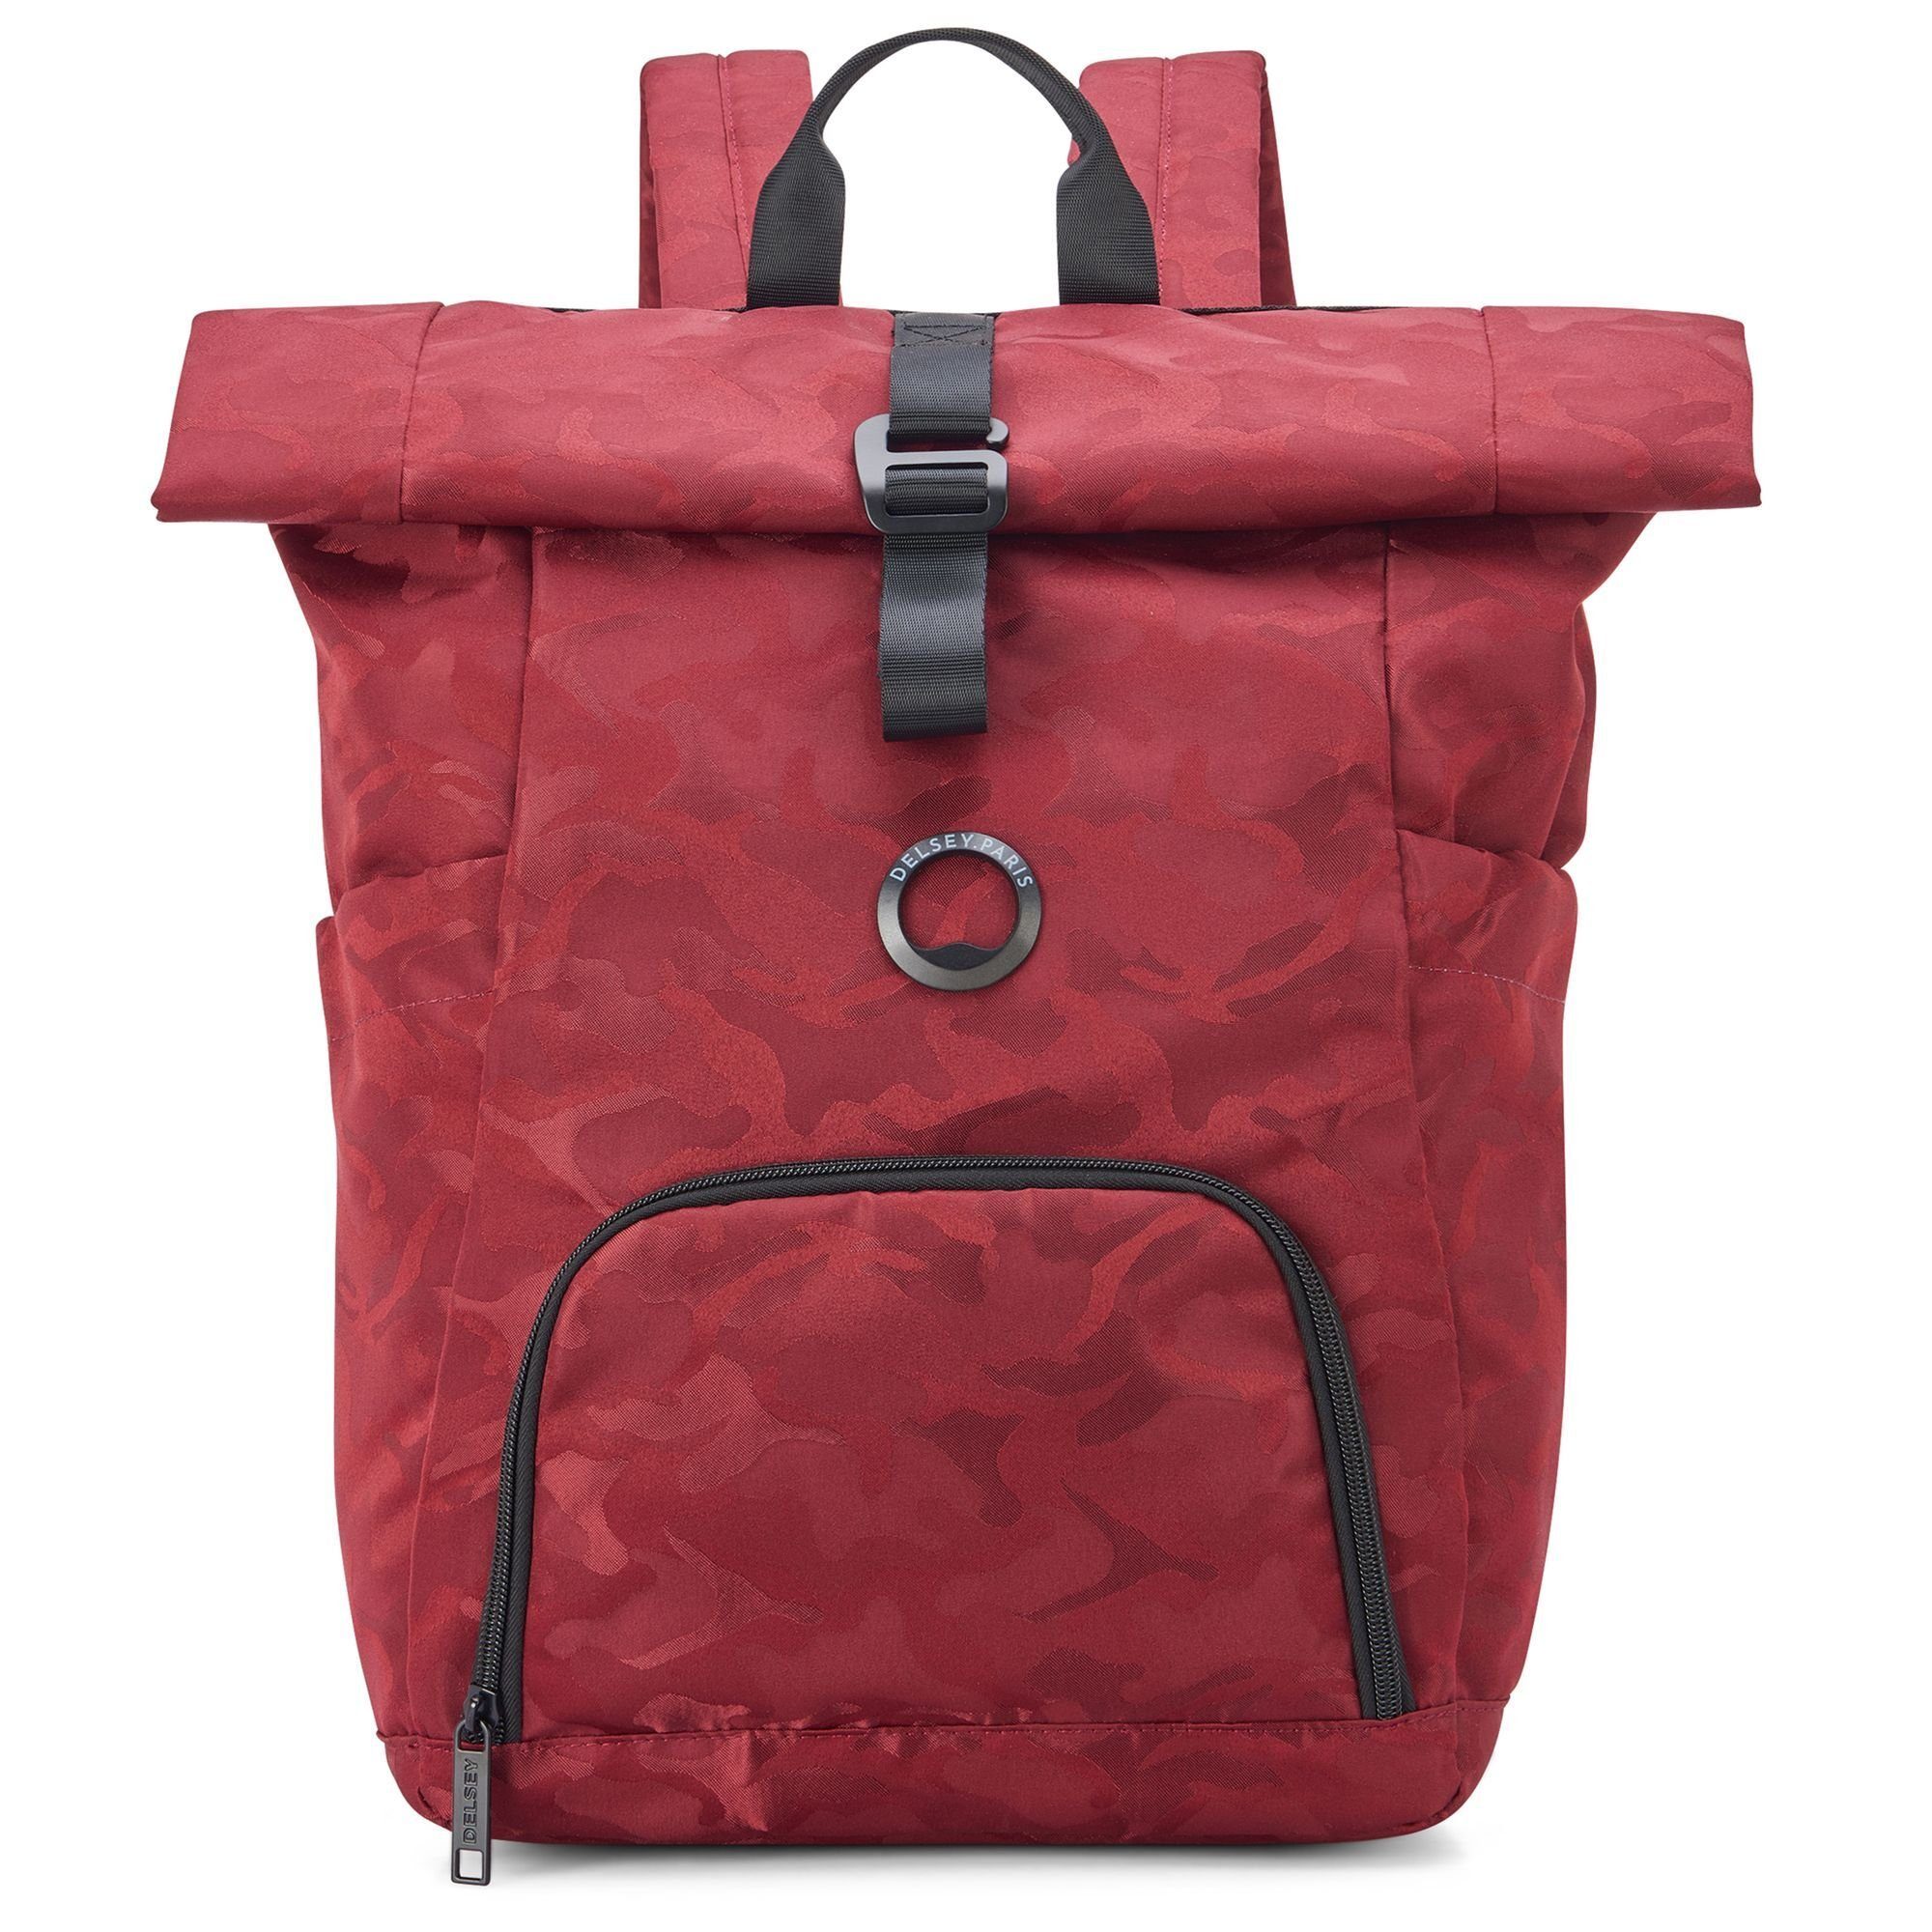 Delsey rouge Polyester camouflage Daypack Citypak,